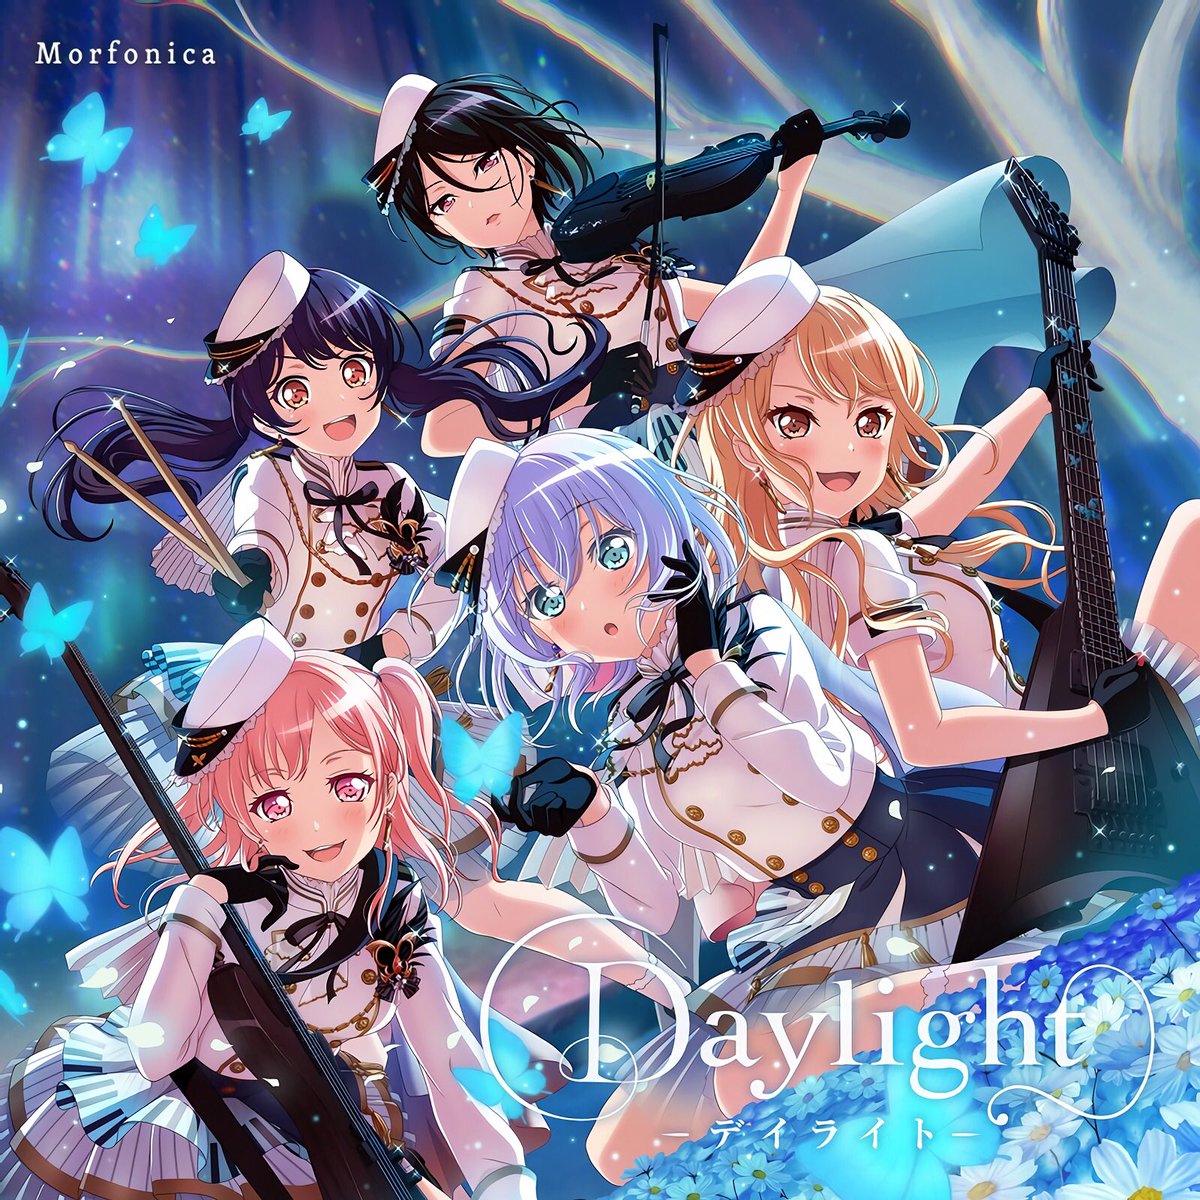 Cover art for『Morfonica - Kiniro e no Prelude』from the release『Daylight -デイライト-』